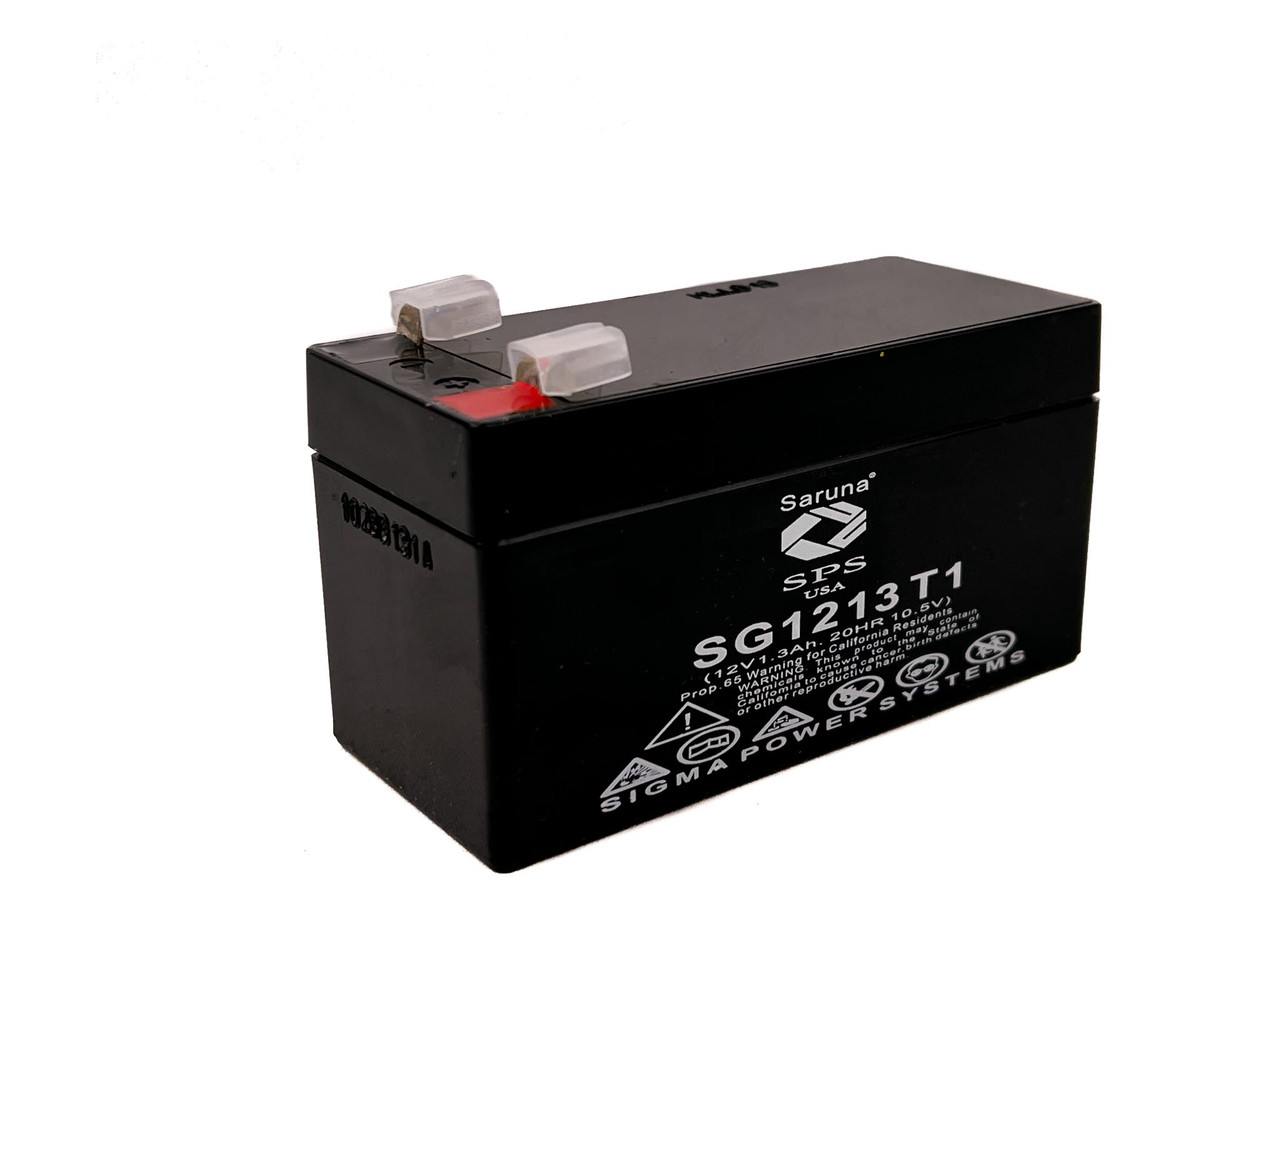 Raion Power 12V 1.3Ah Non-Spillable Replacement Rechargebale Battery for 2014 Range Rover Evoque 17C635 BJ32-19G207C-AA